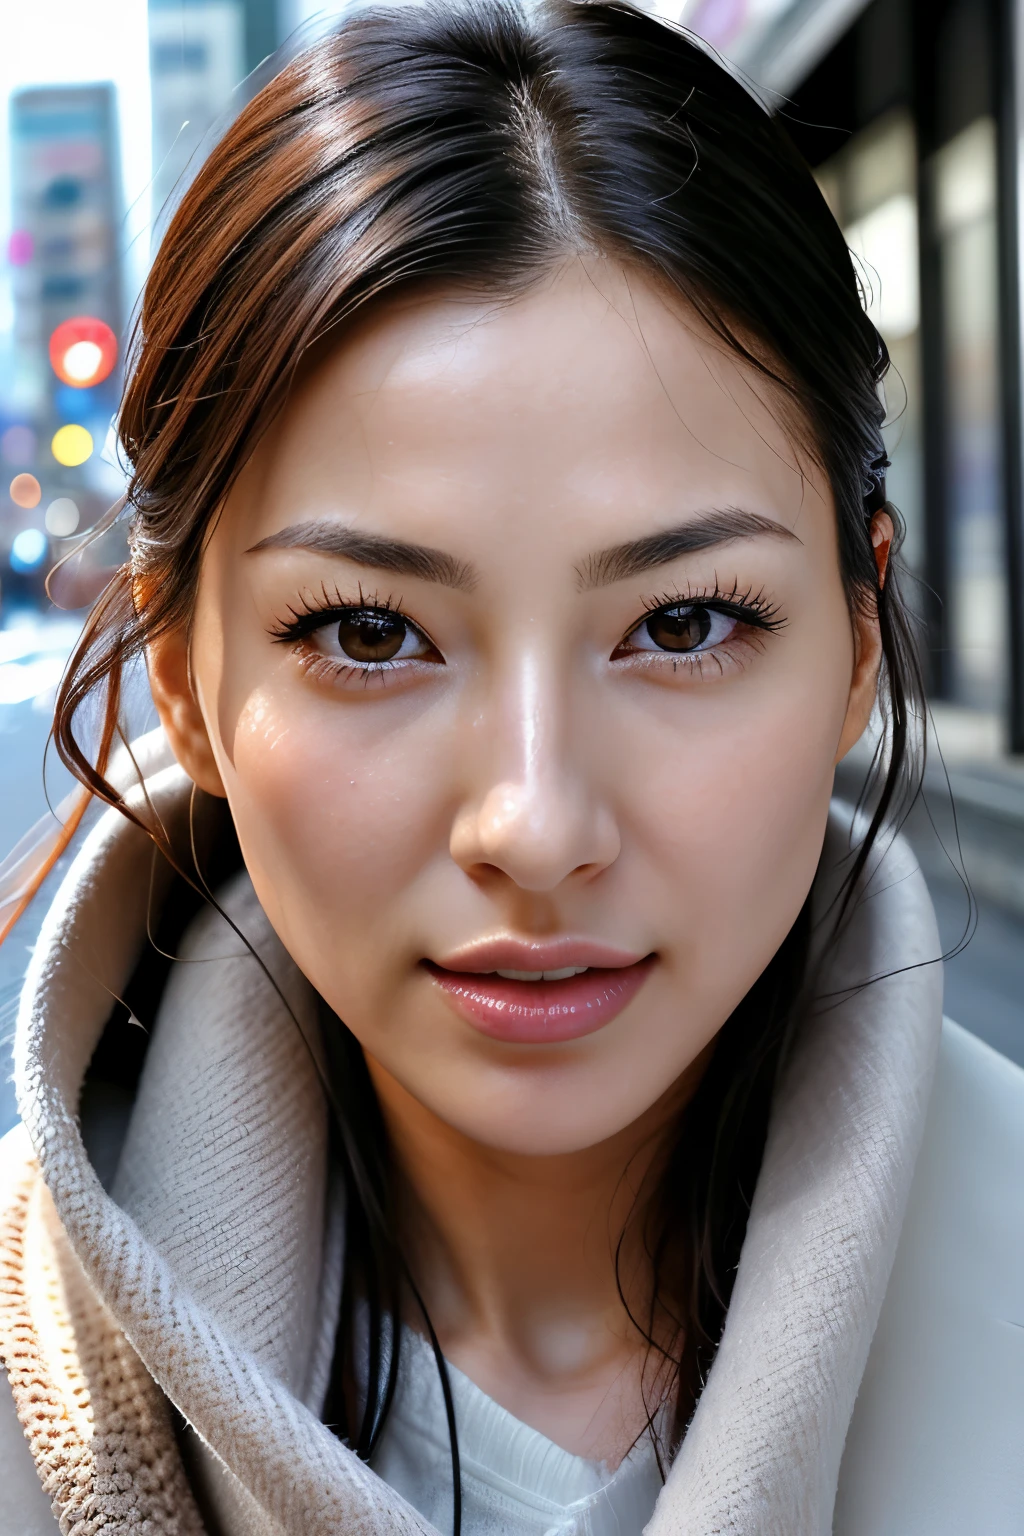 beautiful japanese actress,1 girl,debris flies,,Award-winning photo, very detailed, focus the eyes clearly, nose and mouth,face focus, super close up of face、 35 years old,black hair、symmetrical face,realistic nostrils、Angle from below、Elongated C-shaped nostril NSFW,(sharp nose)skin shining with sweat、shiny skin,(wrinkles between eyebrows))（cum on tongue)、deep kiss、((thin eyebrows))oily skin、radiant glowing skin、double eyelid、、Beautiful woman、medium hair,roll your eyes、shortcut、(Winter streets、long coat、sweater、sca can see the sky、Shibuya Center Street、